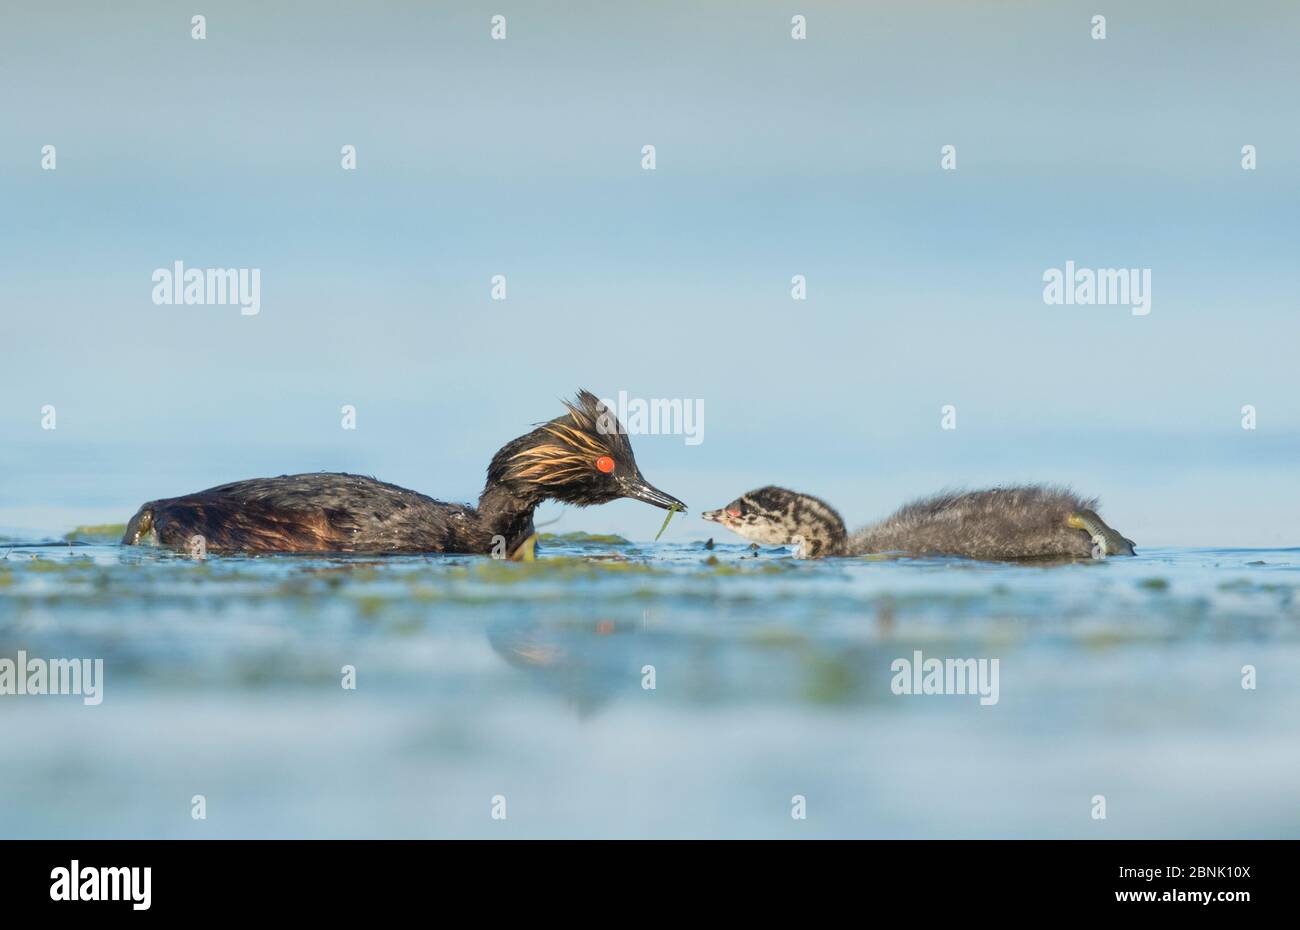 Eared grebes (Podiceps nigricollis), adult offering food (damselfly) to chick on the water, Bowdoin National Wildlife Refuge, Montana, USA Stock Photo